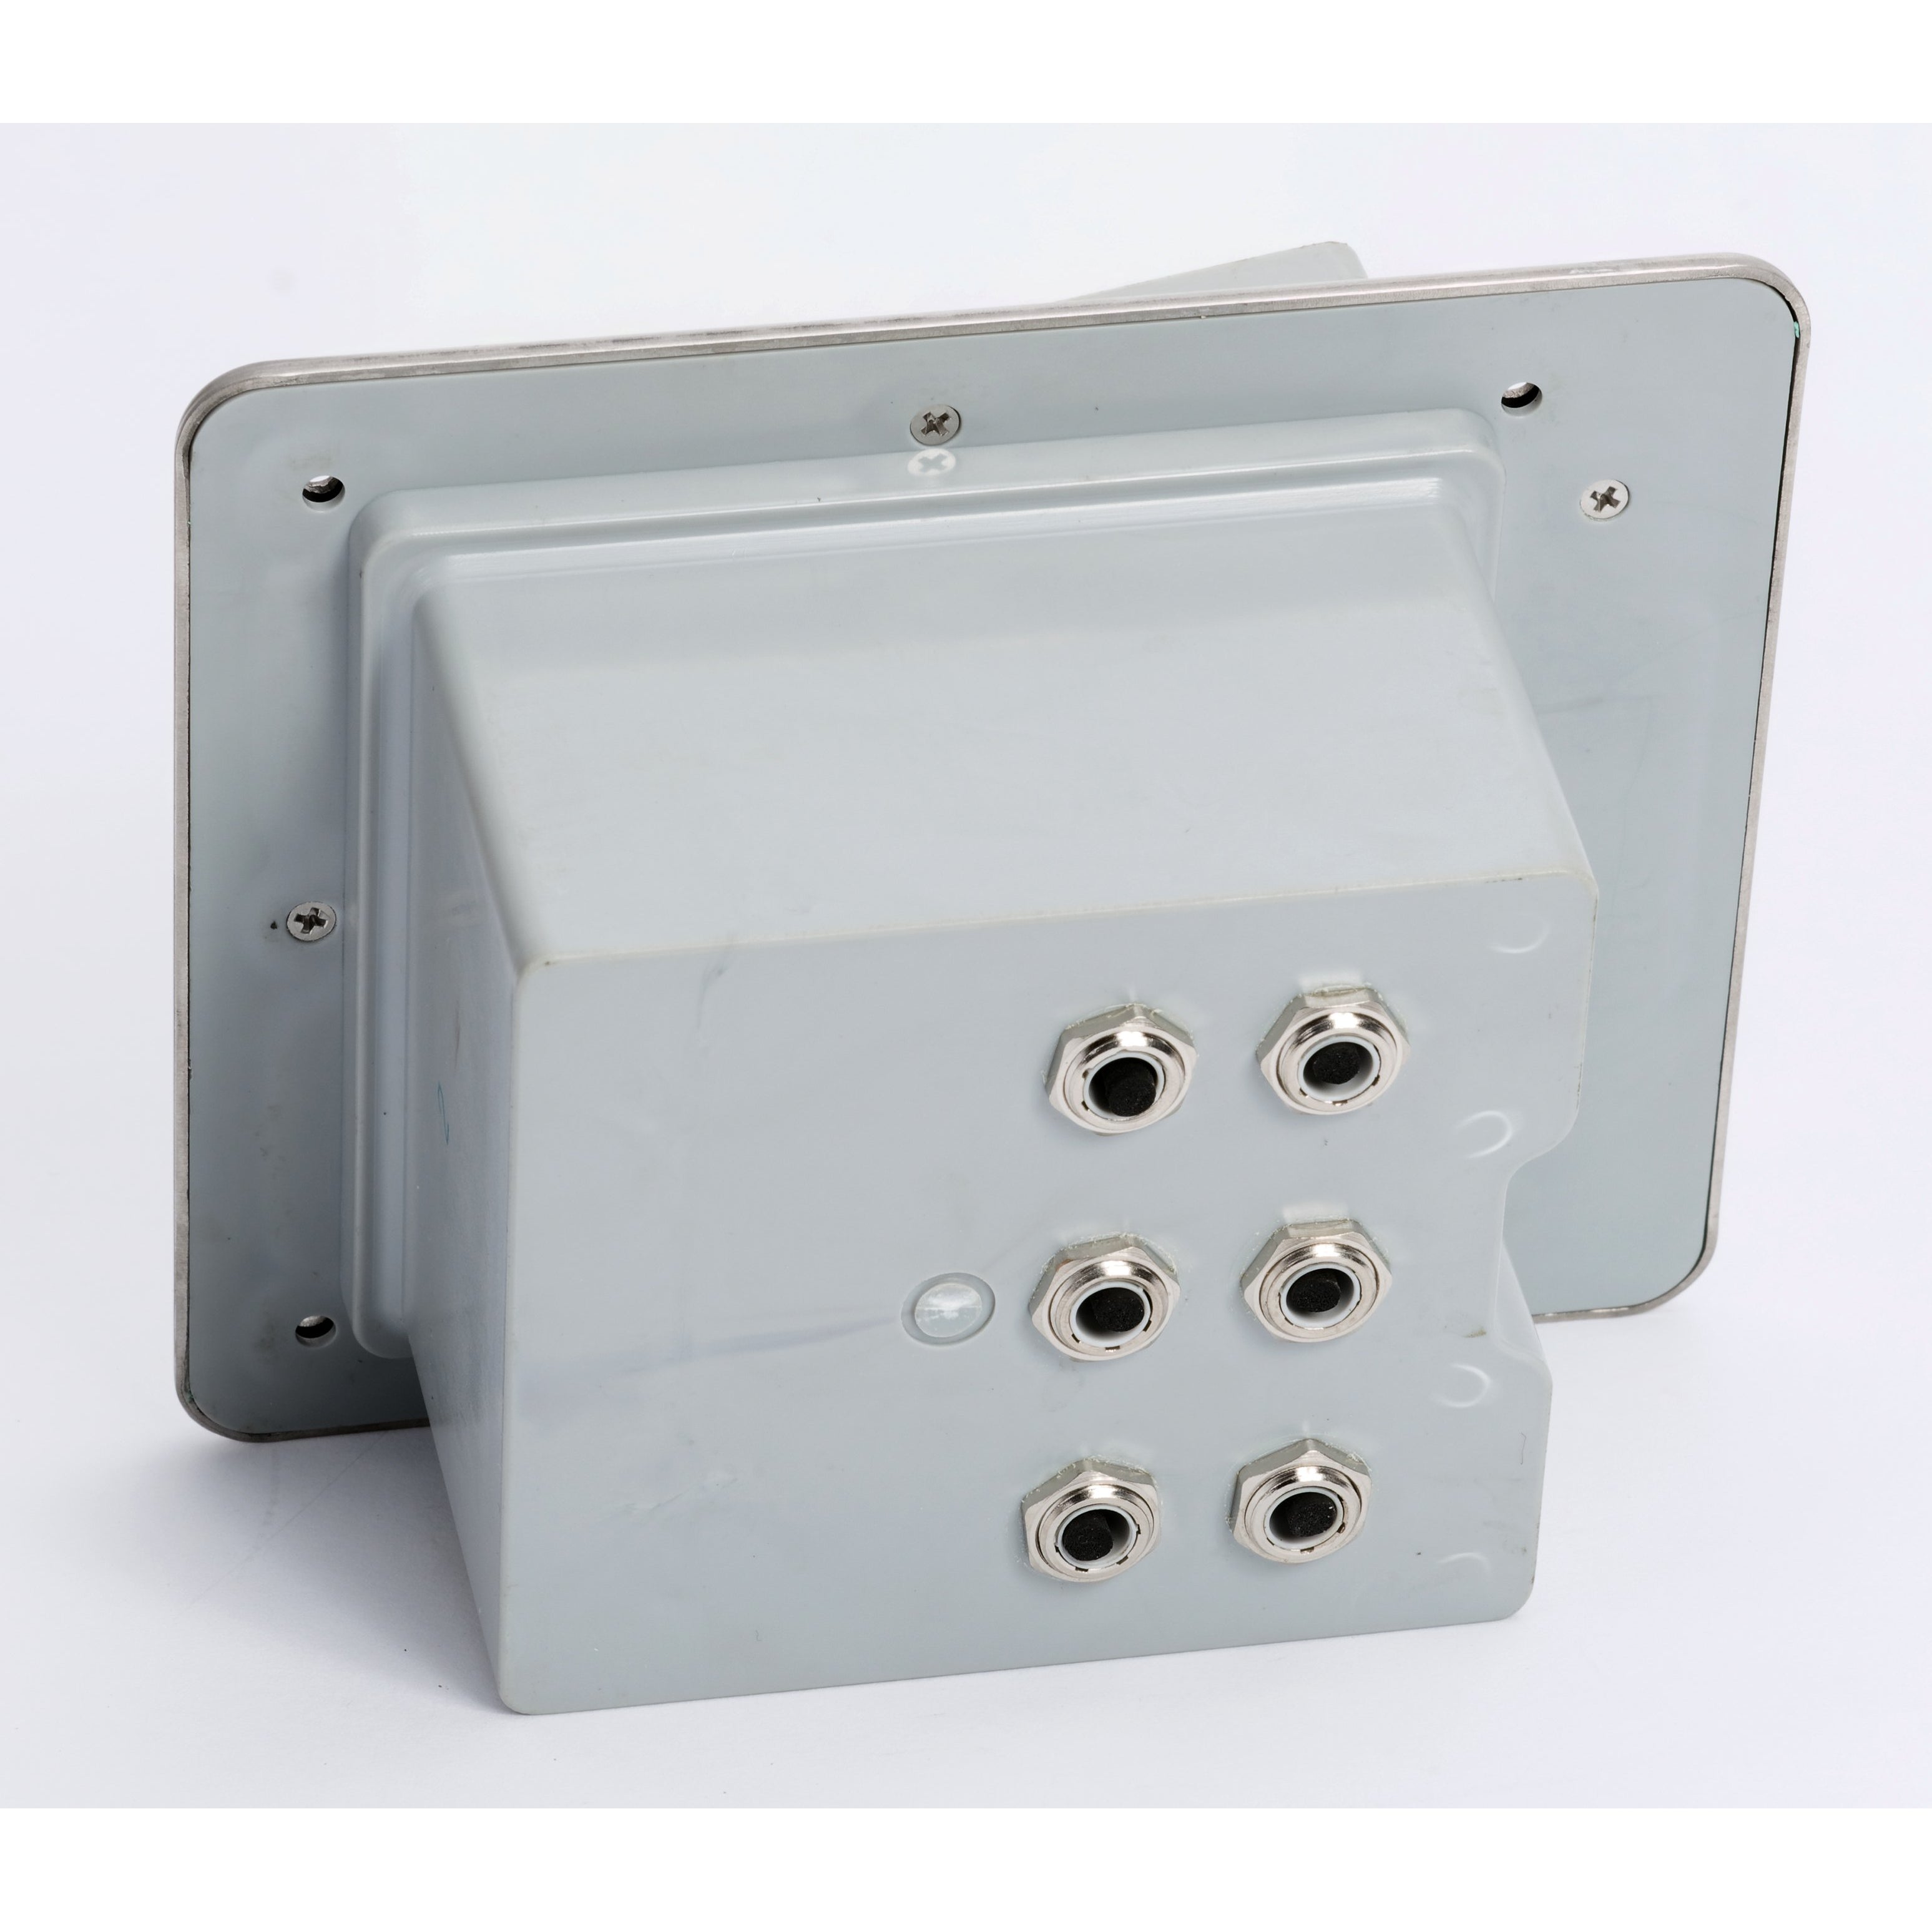 Outdoor Electrical Junction Box - 8 x 8 Inch Waterproof Plastic Box with  Cover for Electronics